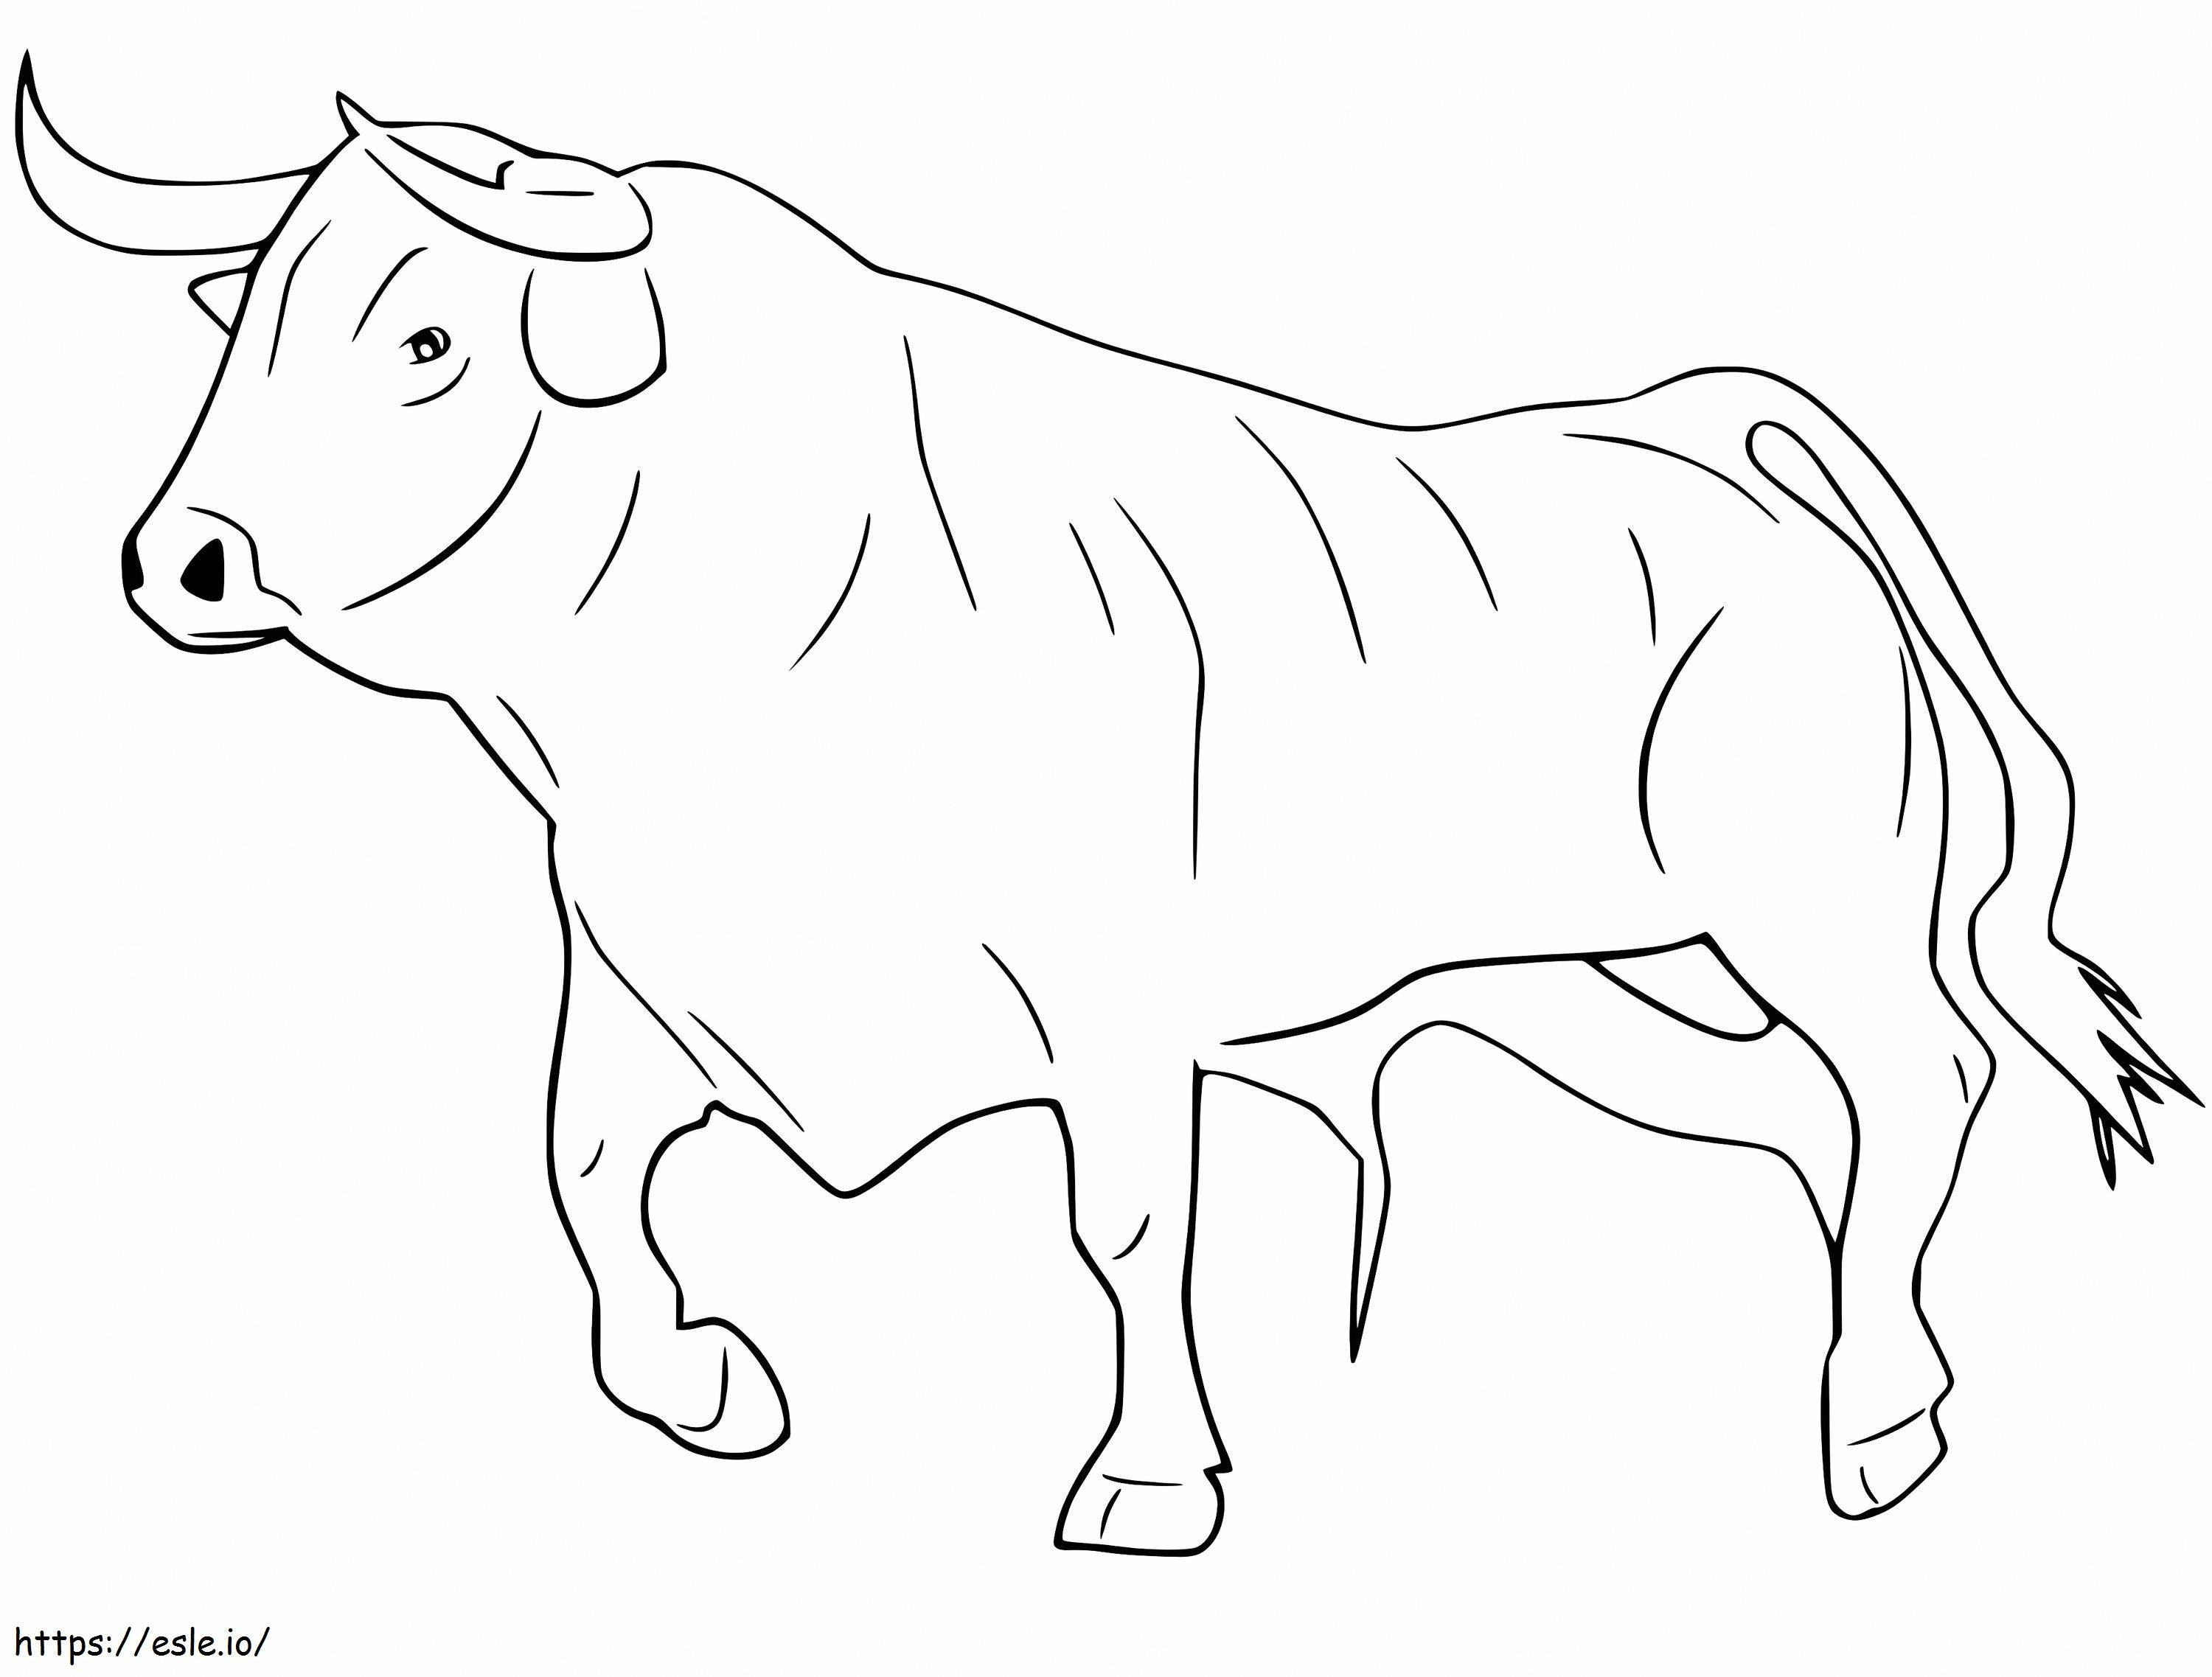 Bull 2 coloring page